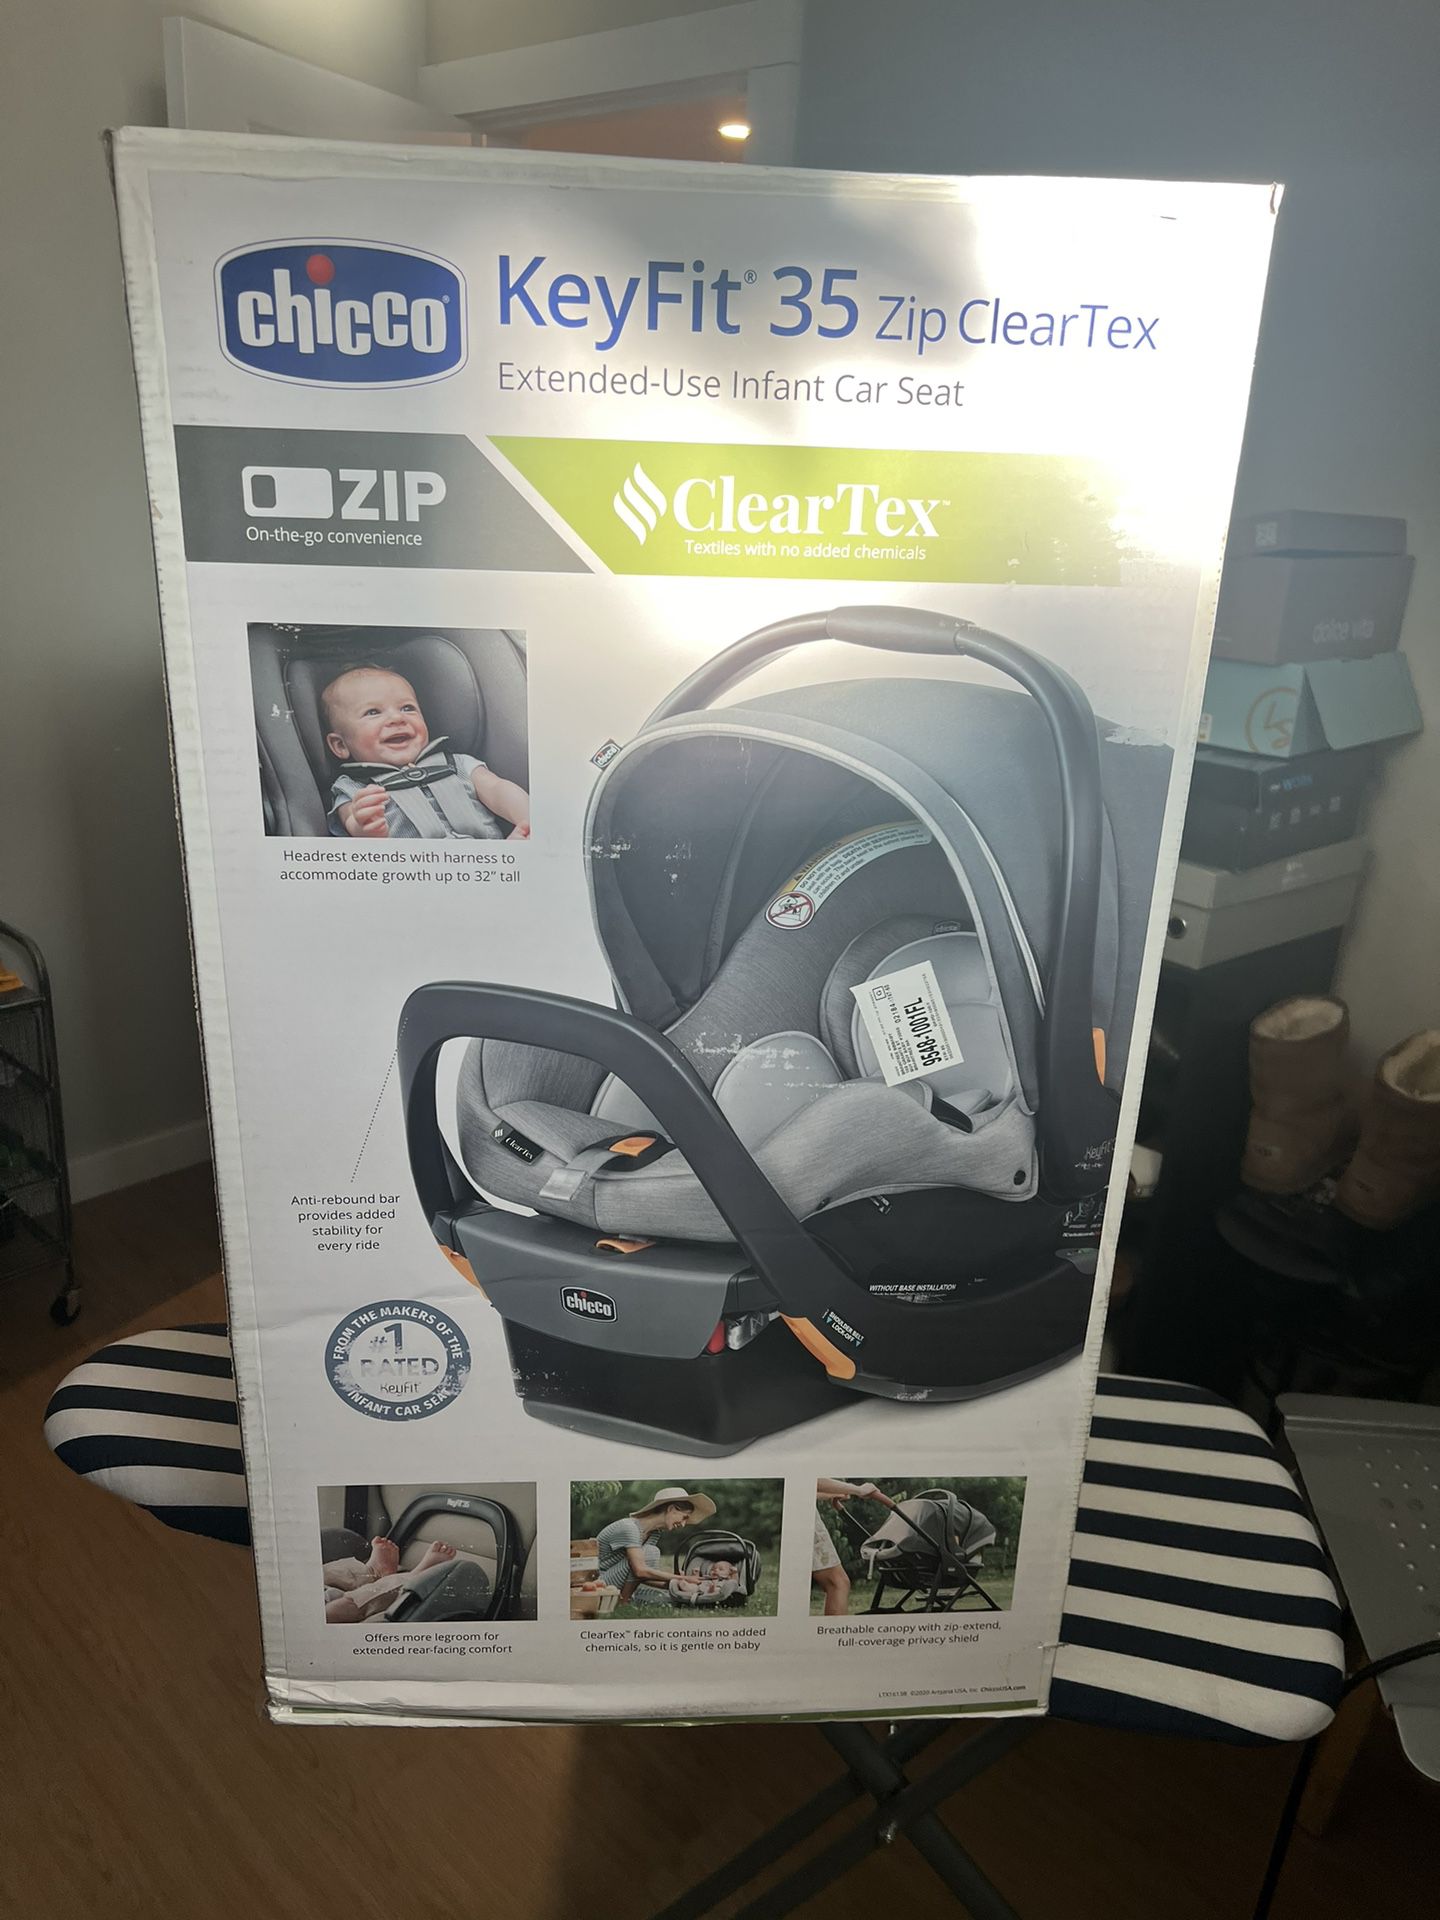 chicco KeyFit 35 Zip ClearTex Infant Car Seat